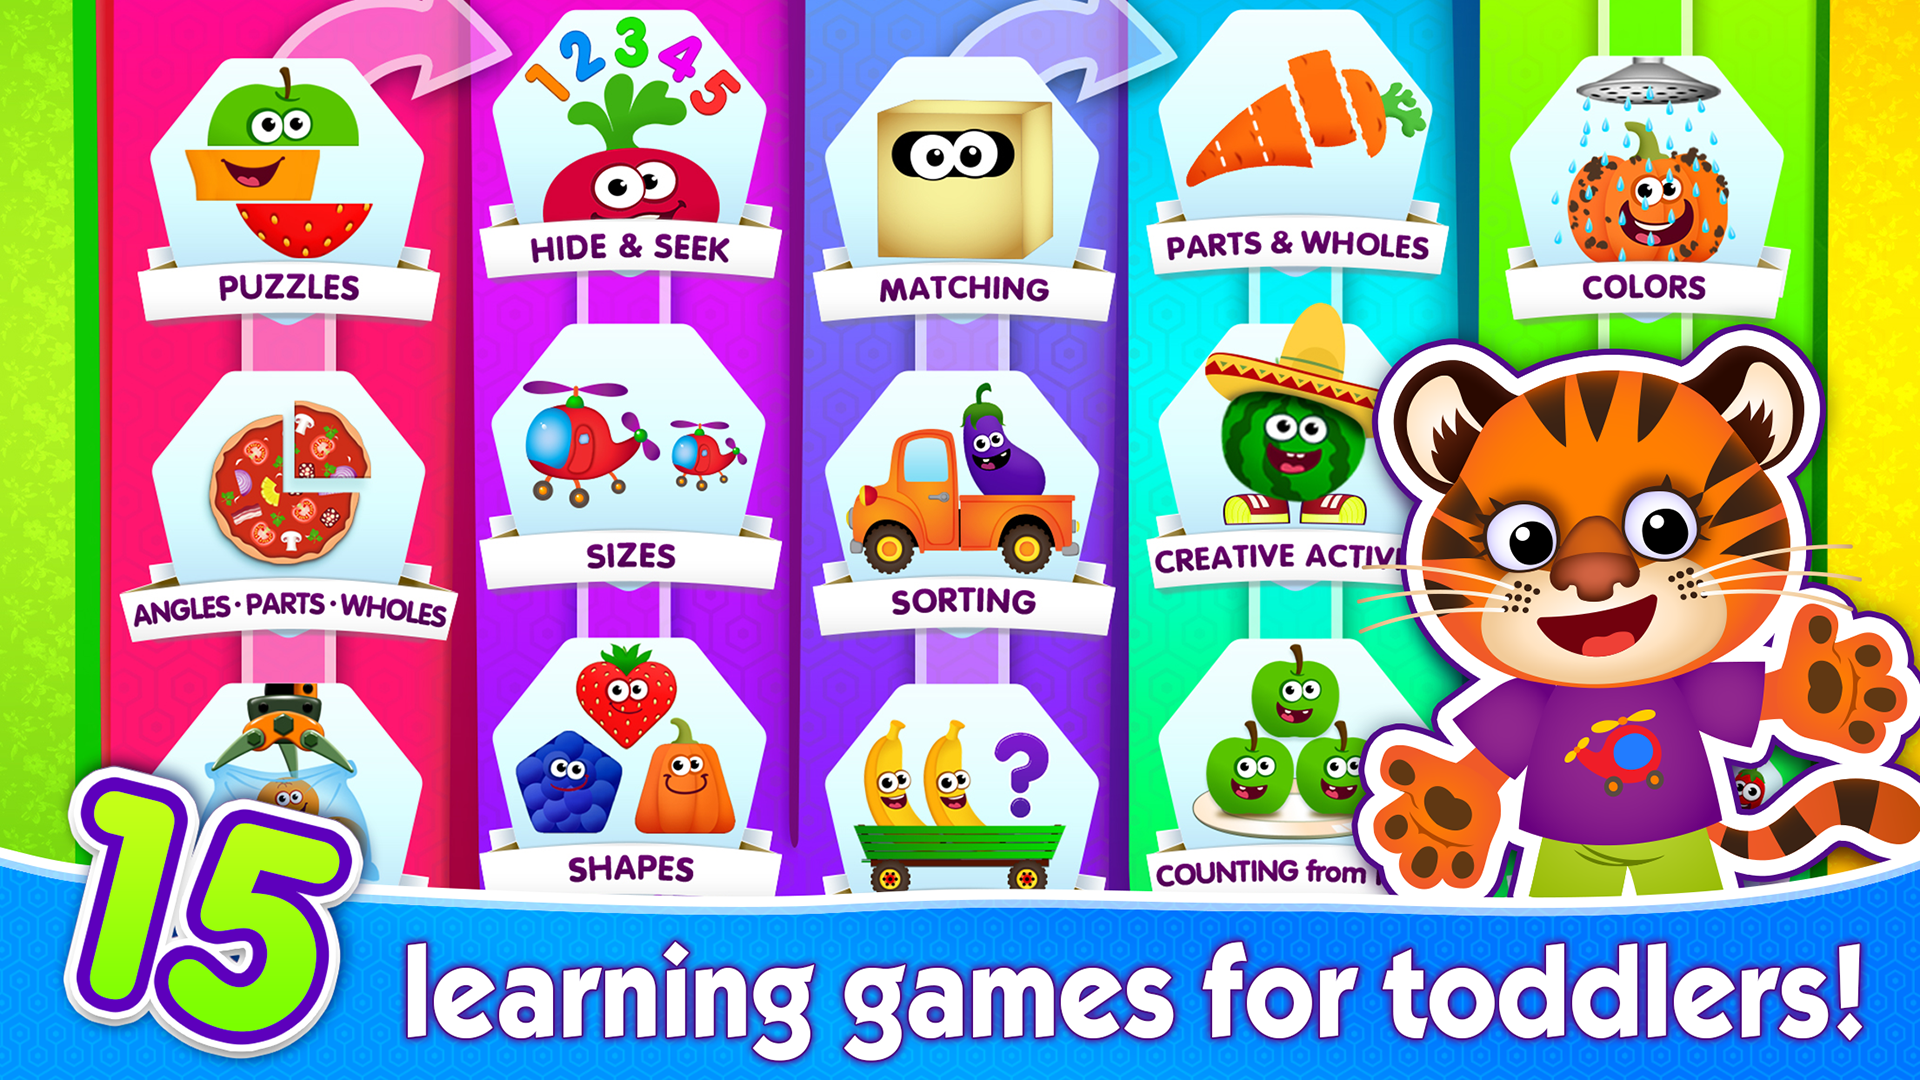 Funny Food 2 - Educational Games for Kids Toddlers in Learning Apps 4 Babies & Preschoolers! Kindergarten Game for Girls Boys 3 5 Years Old: Children Learn Smart Baby Shapes and Colors! Puzzle matching free develop fine motor skills, attention, logic